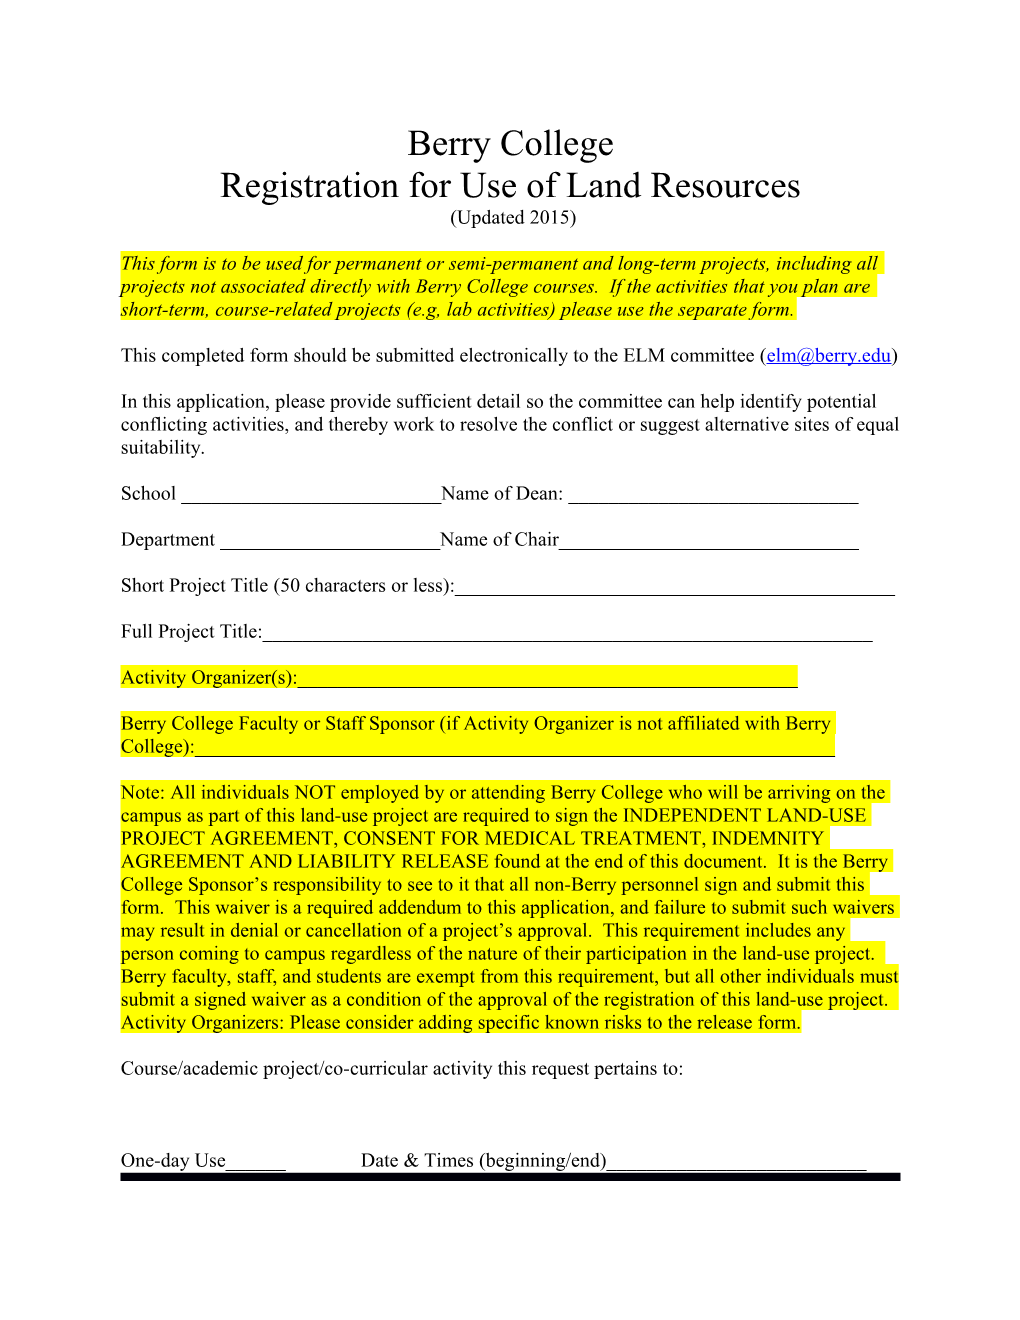 Registration for Use of Land Resources